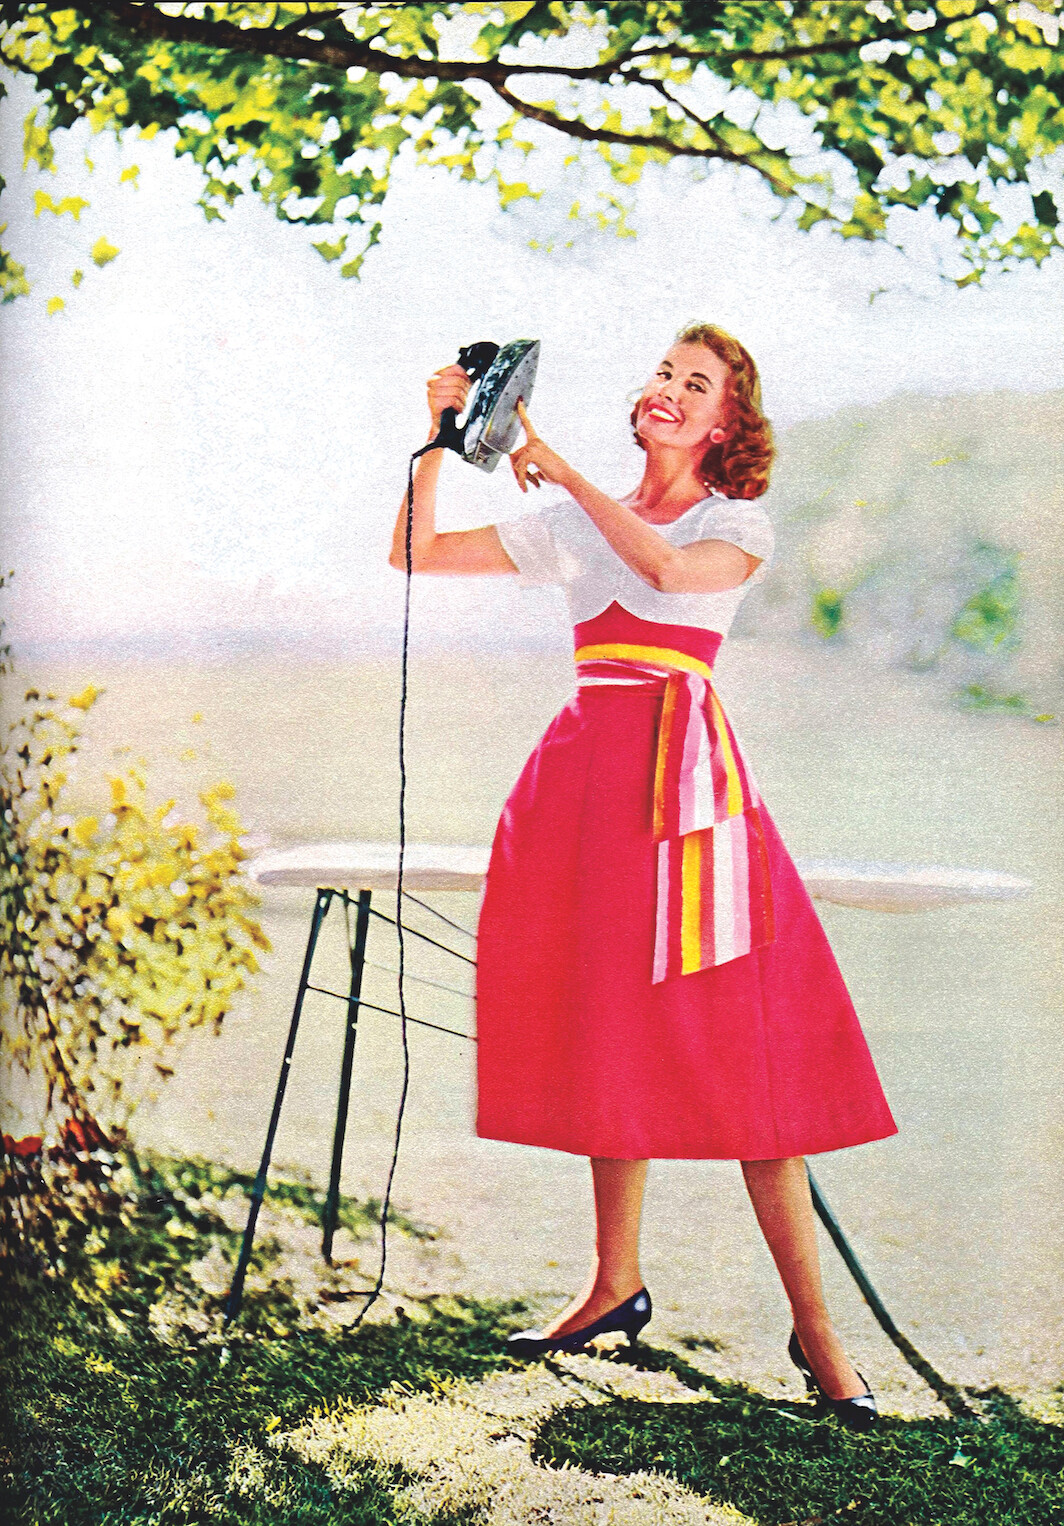 Illustration from Woman’s Day Magazine (February 1957).